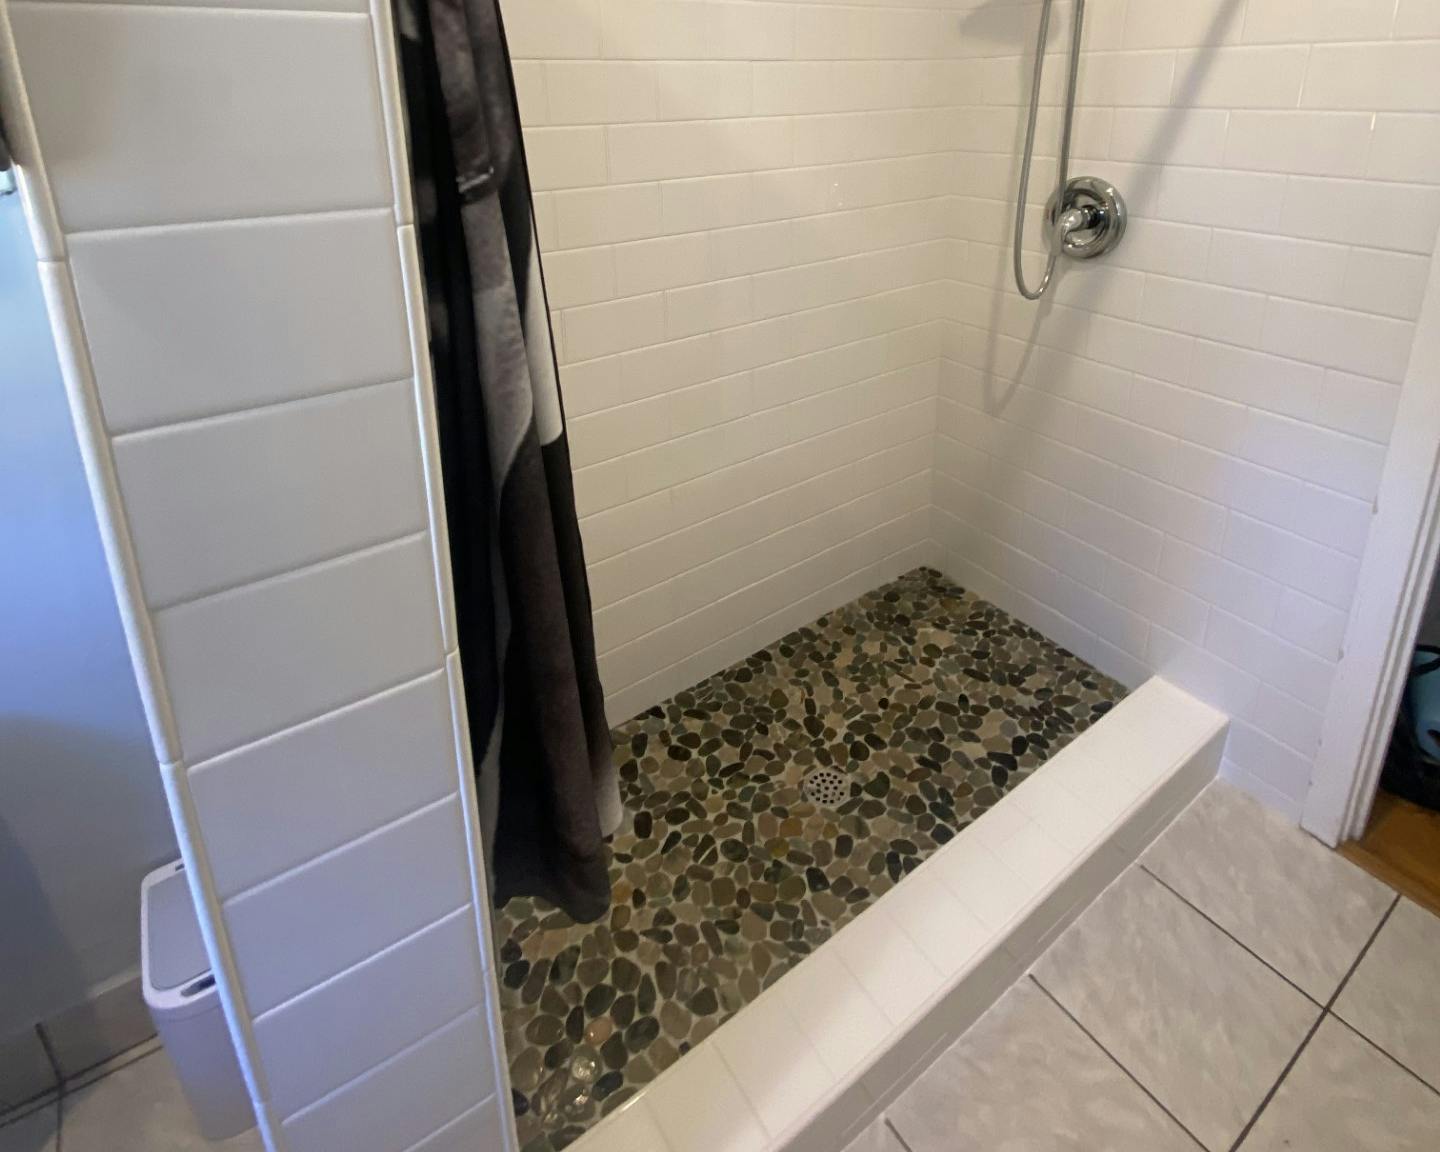 "A modern bathroom corner featuring a walk-in shower with white horizontal tiling on the walls and a pebble stone floor. A stainless steel handheld showerhead is mounted on the right wall. To the left, a white folding laundry hamper stands next to a draped dark shower curtain. The foreground shows a glimpse of a white bathtub edge and gray floor tiles.